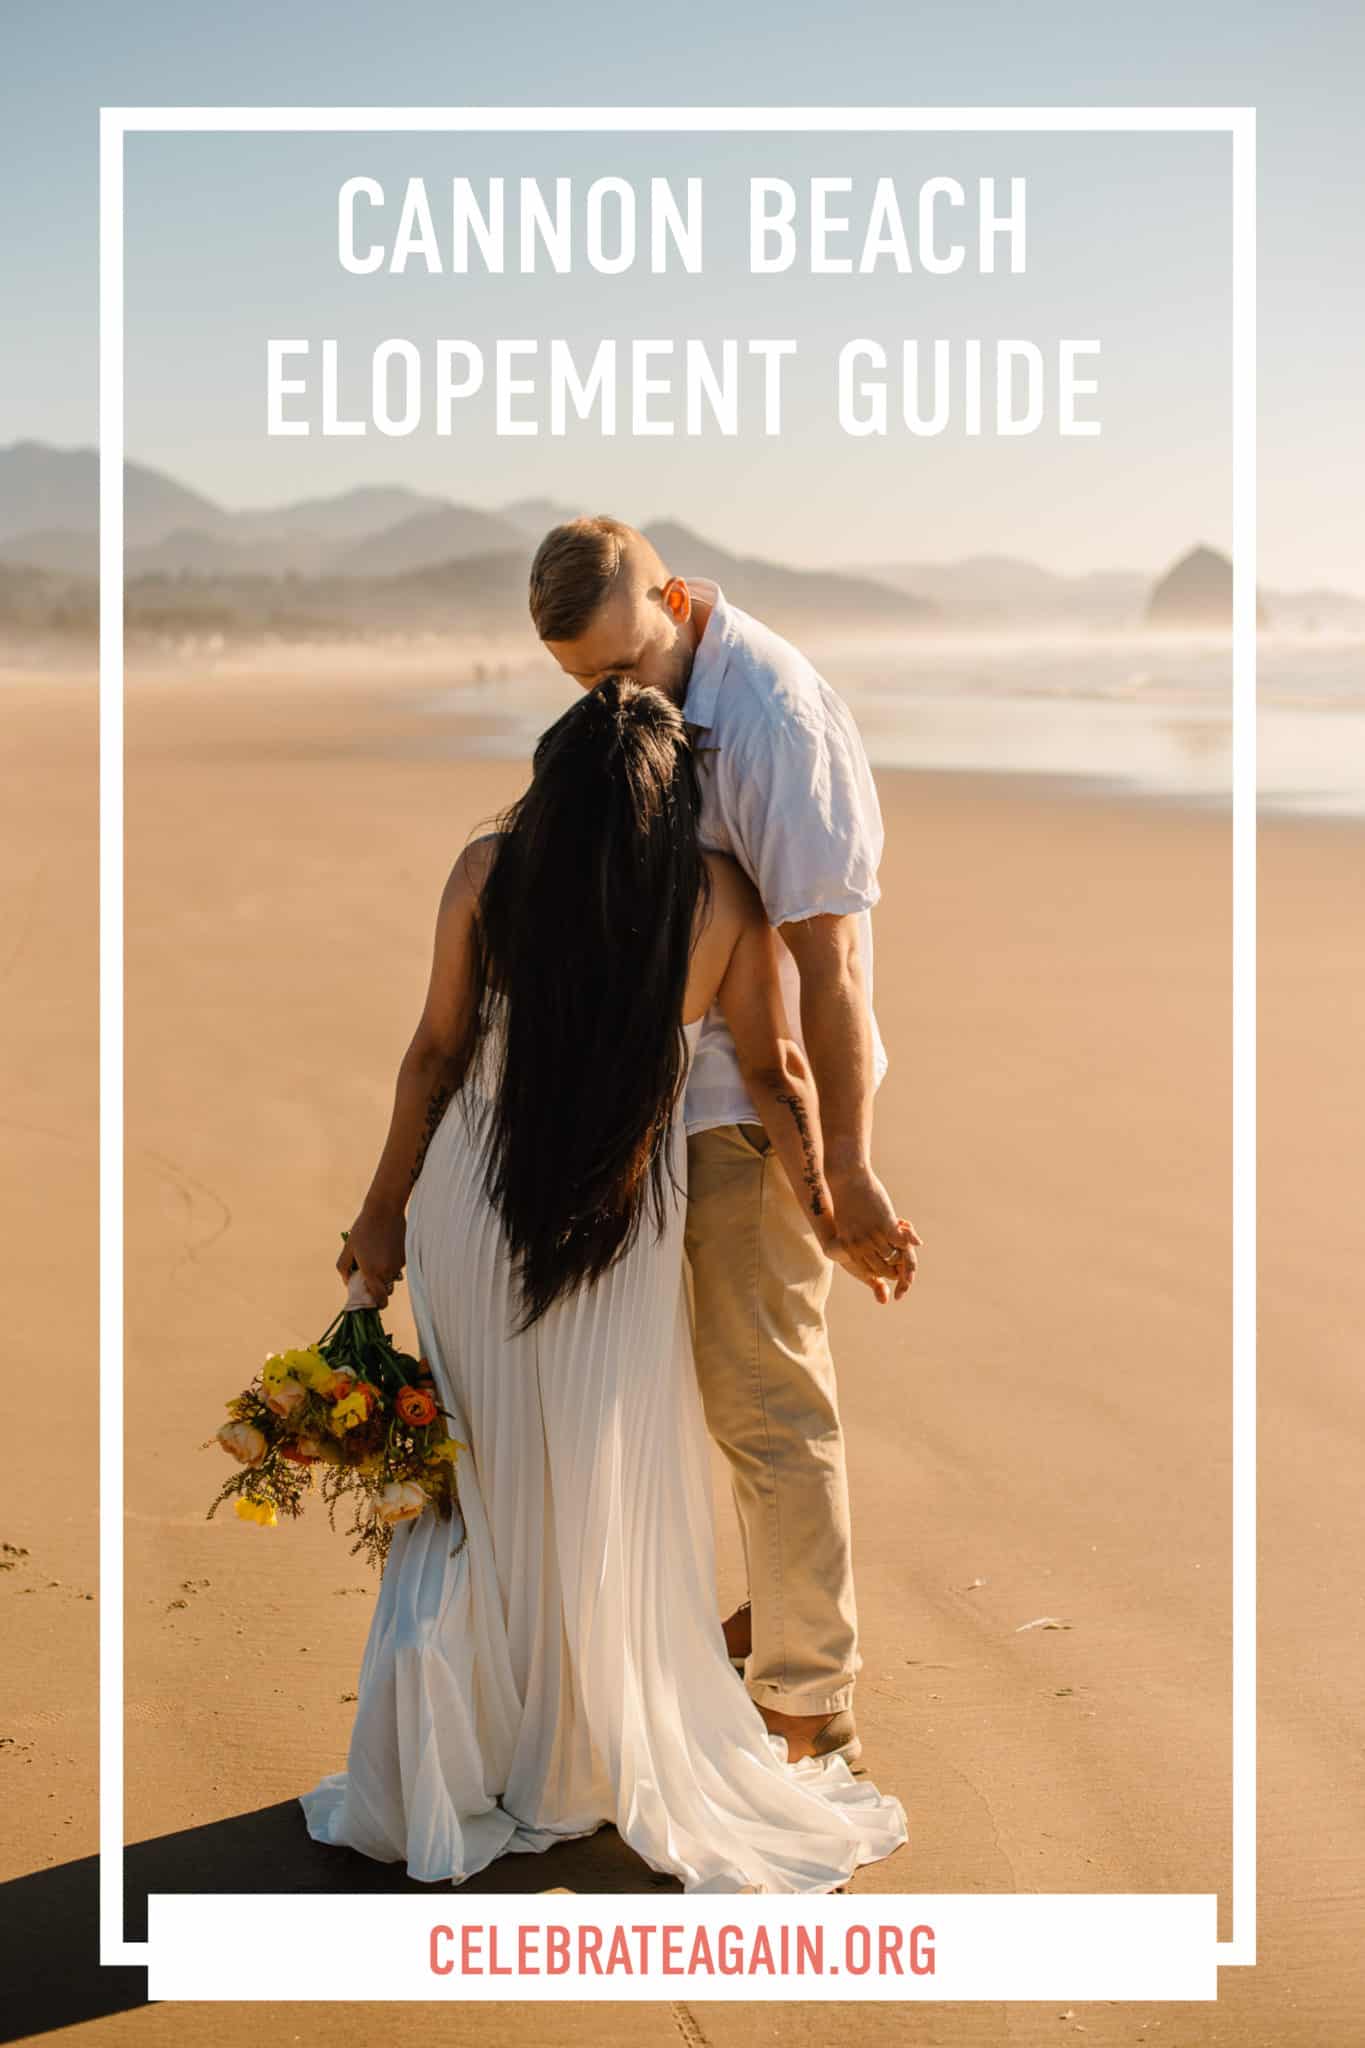 cannon beach elopement guide view of a couple kissing on cannon beach oregon after eloping themselves